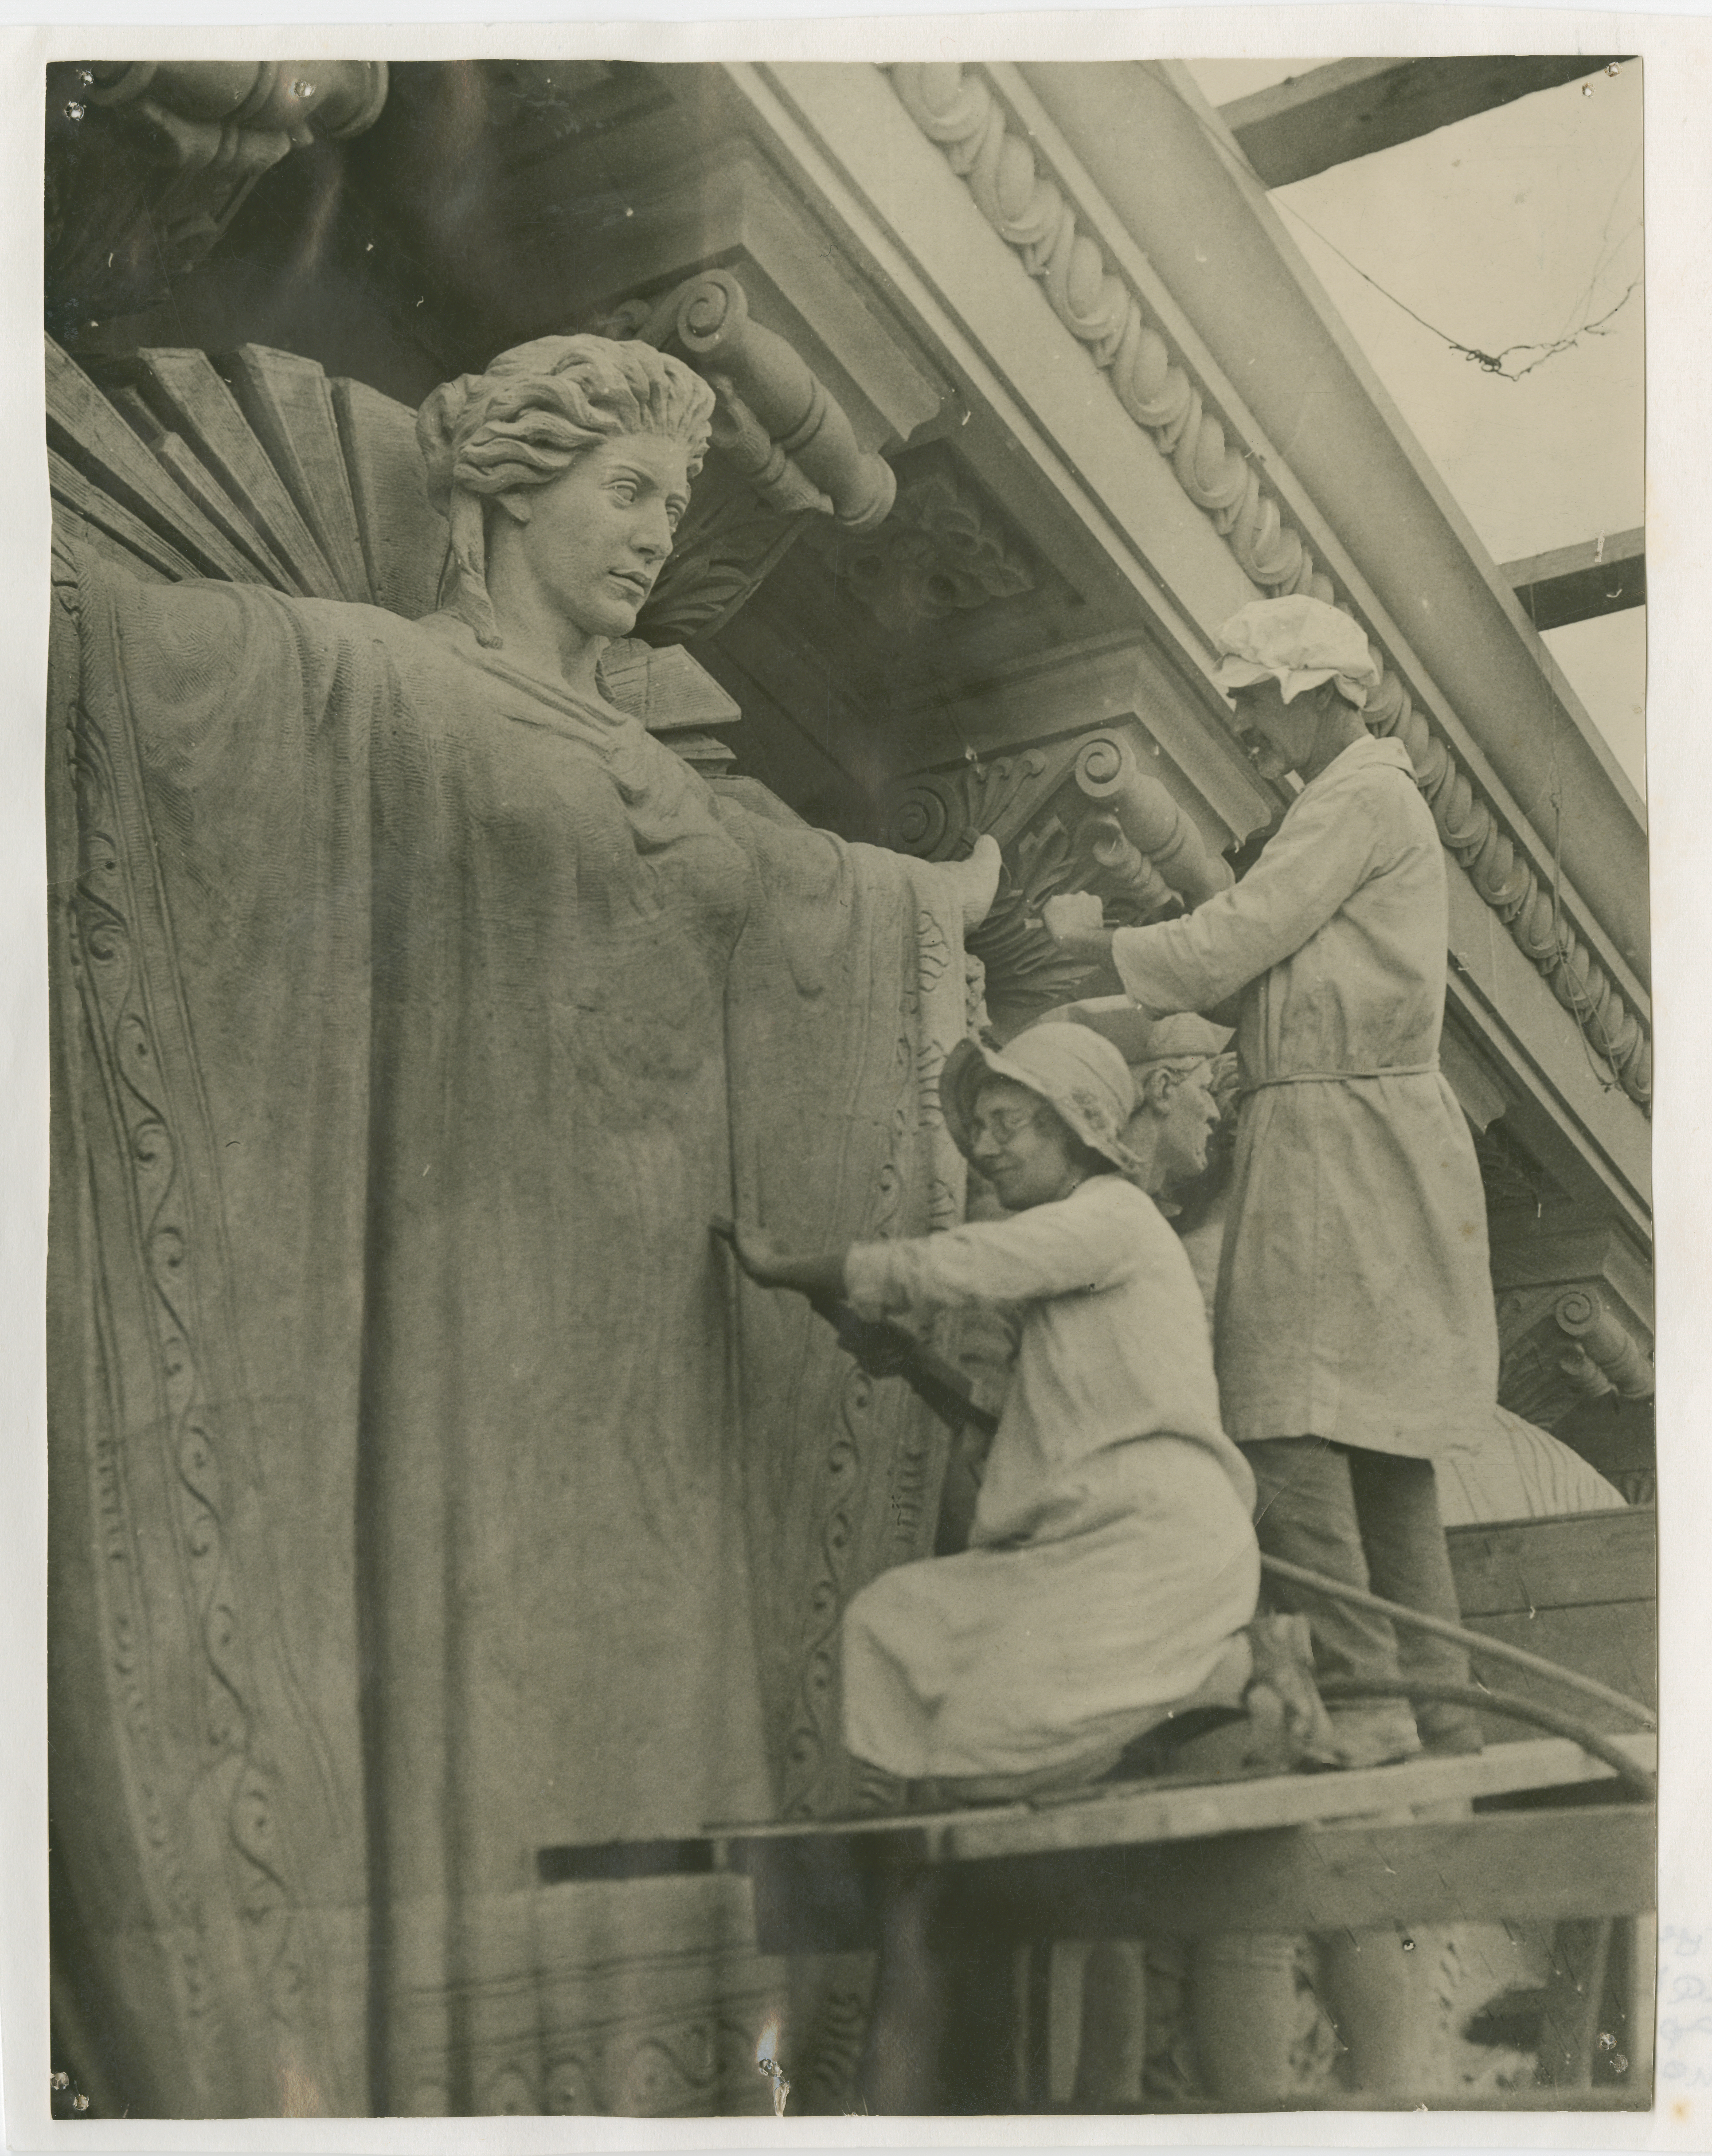 Daphne Mayo working with John Theodore Muller on the central figure of the Brisbane City Hall tympanum